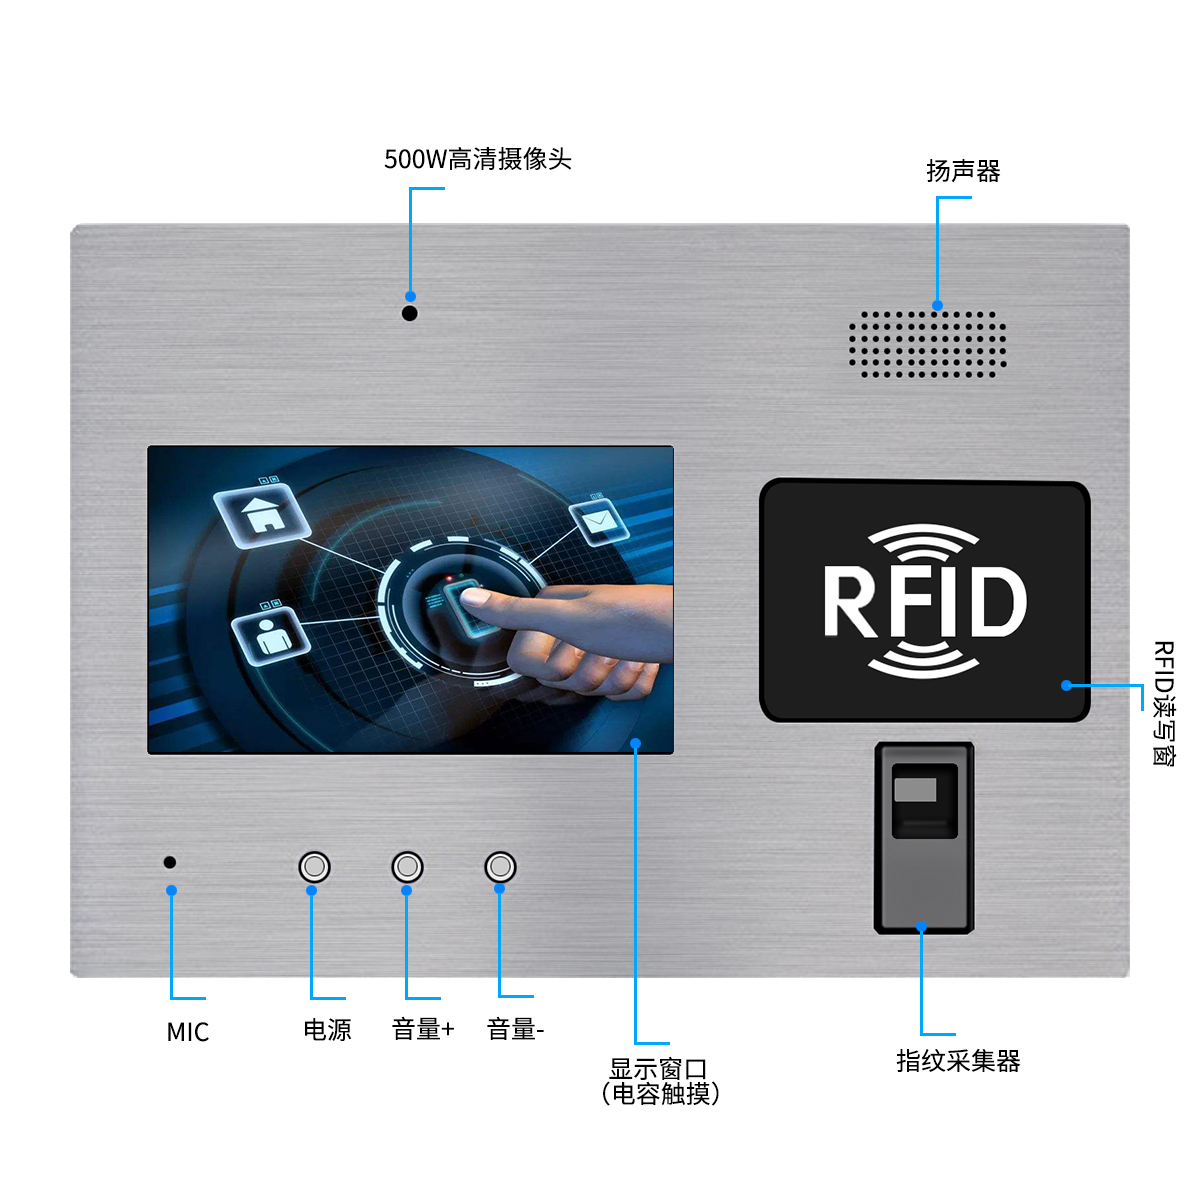 embedded panel PC with RFID NFC card reader